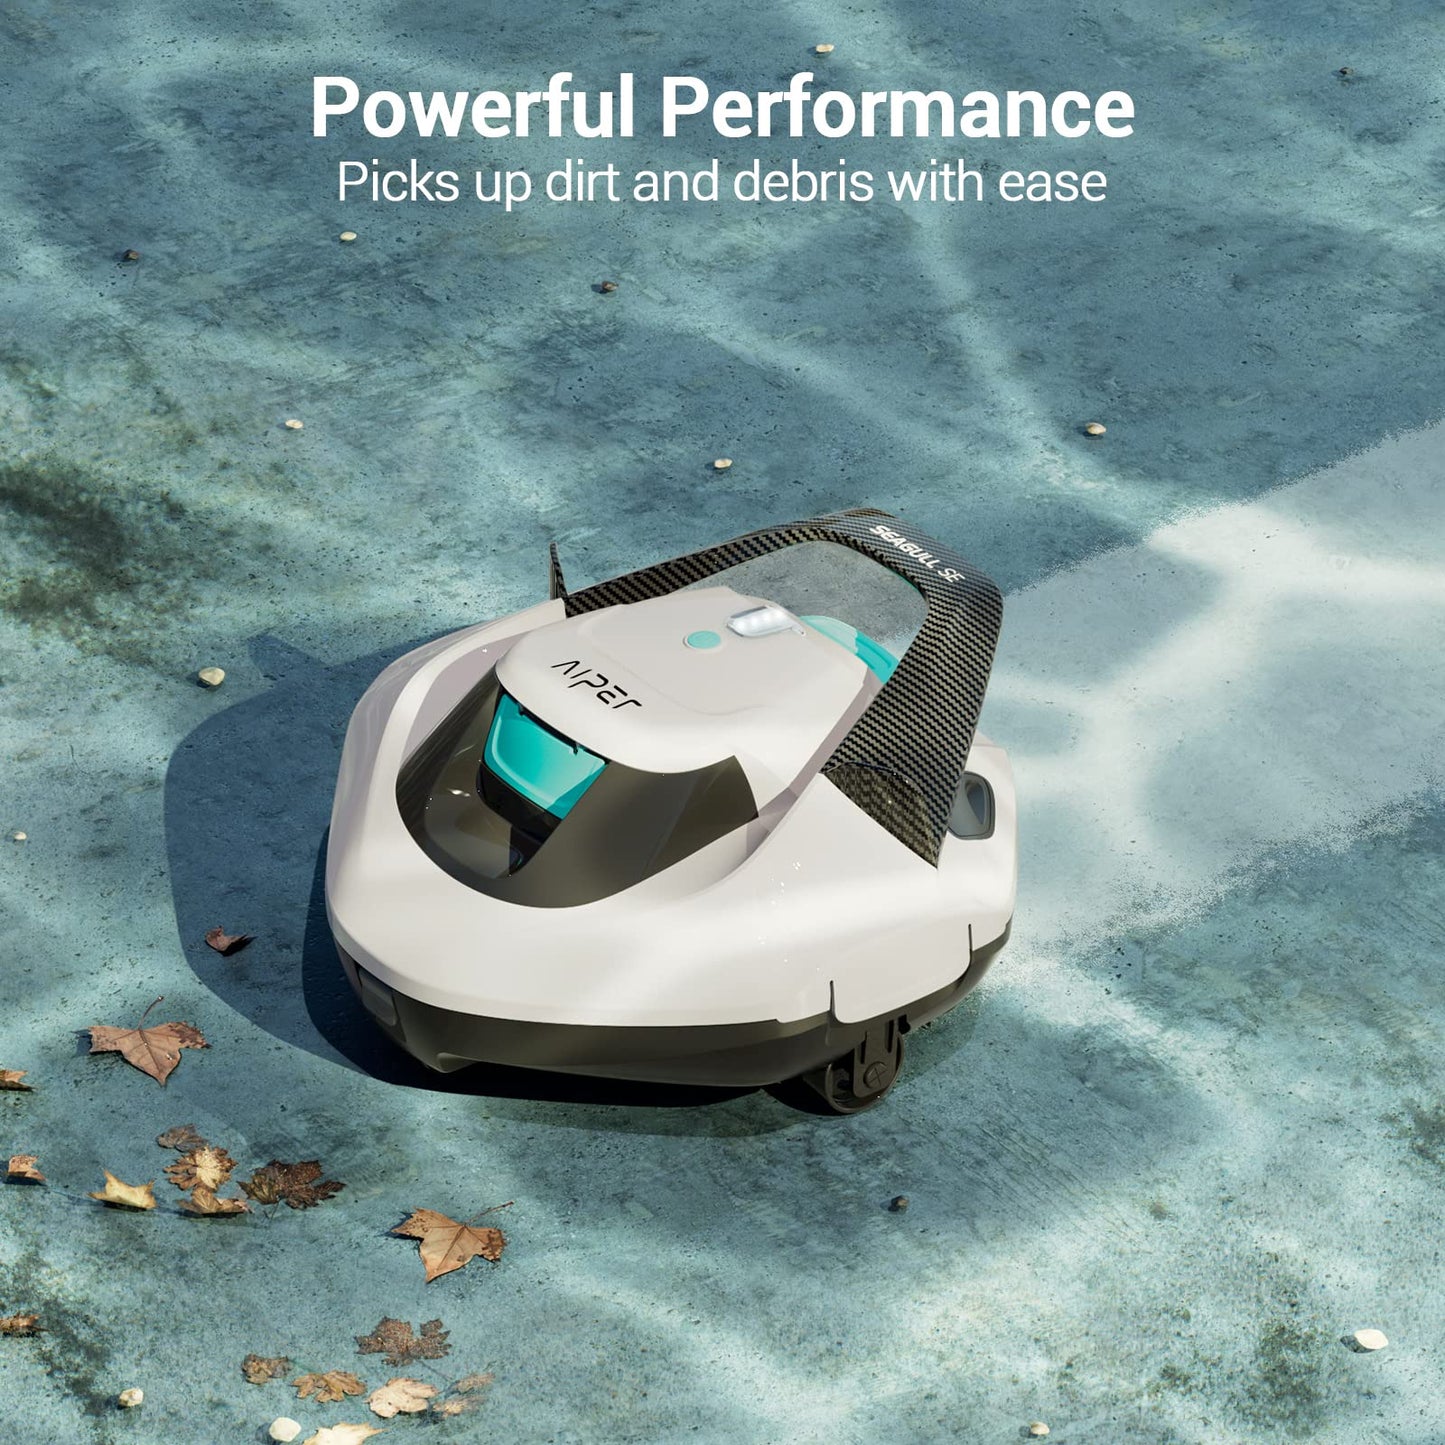 AIPER Cordless Robotic Pool Cleaner, Pool Vacuum with Dual-Drive Motors, Self-Parking Technology, Lightweight, Perfect for Above-Ground/In-Ground Flat Pools up to 40 Feet (Lasts 90 Mins) White